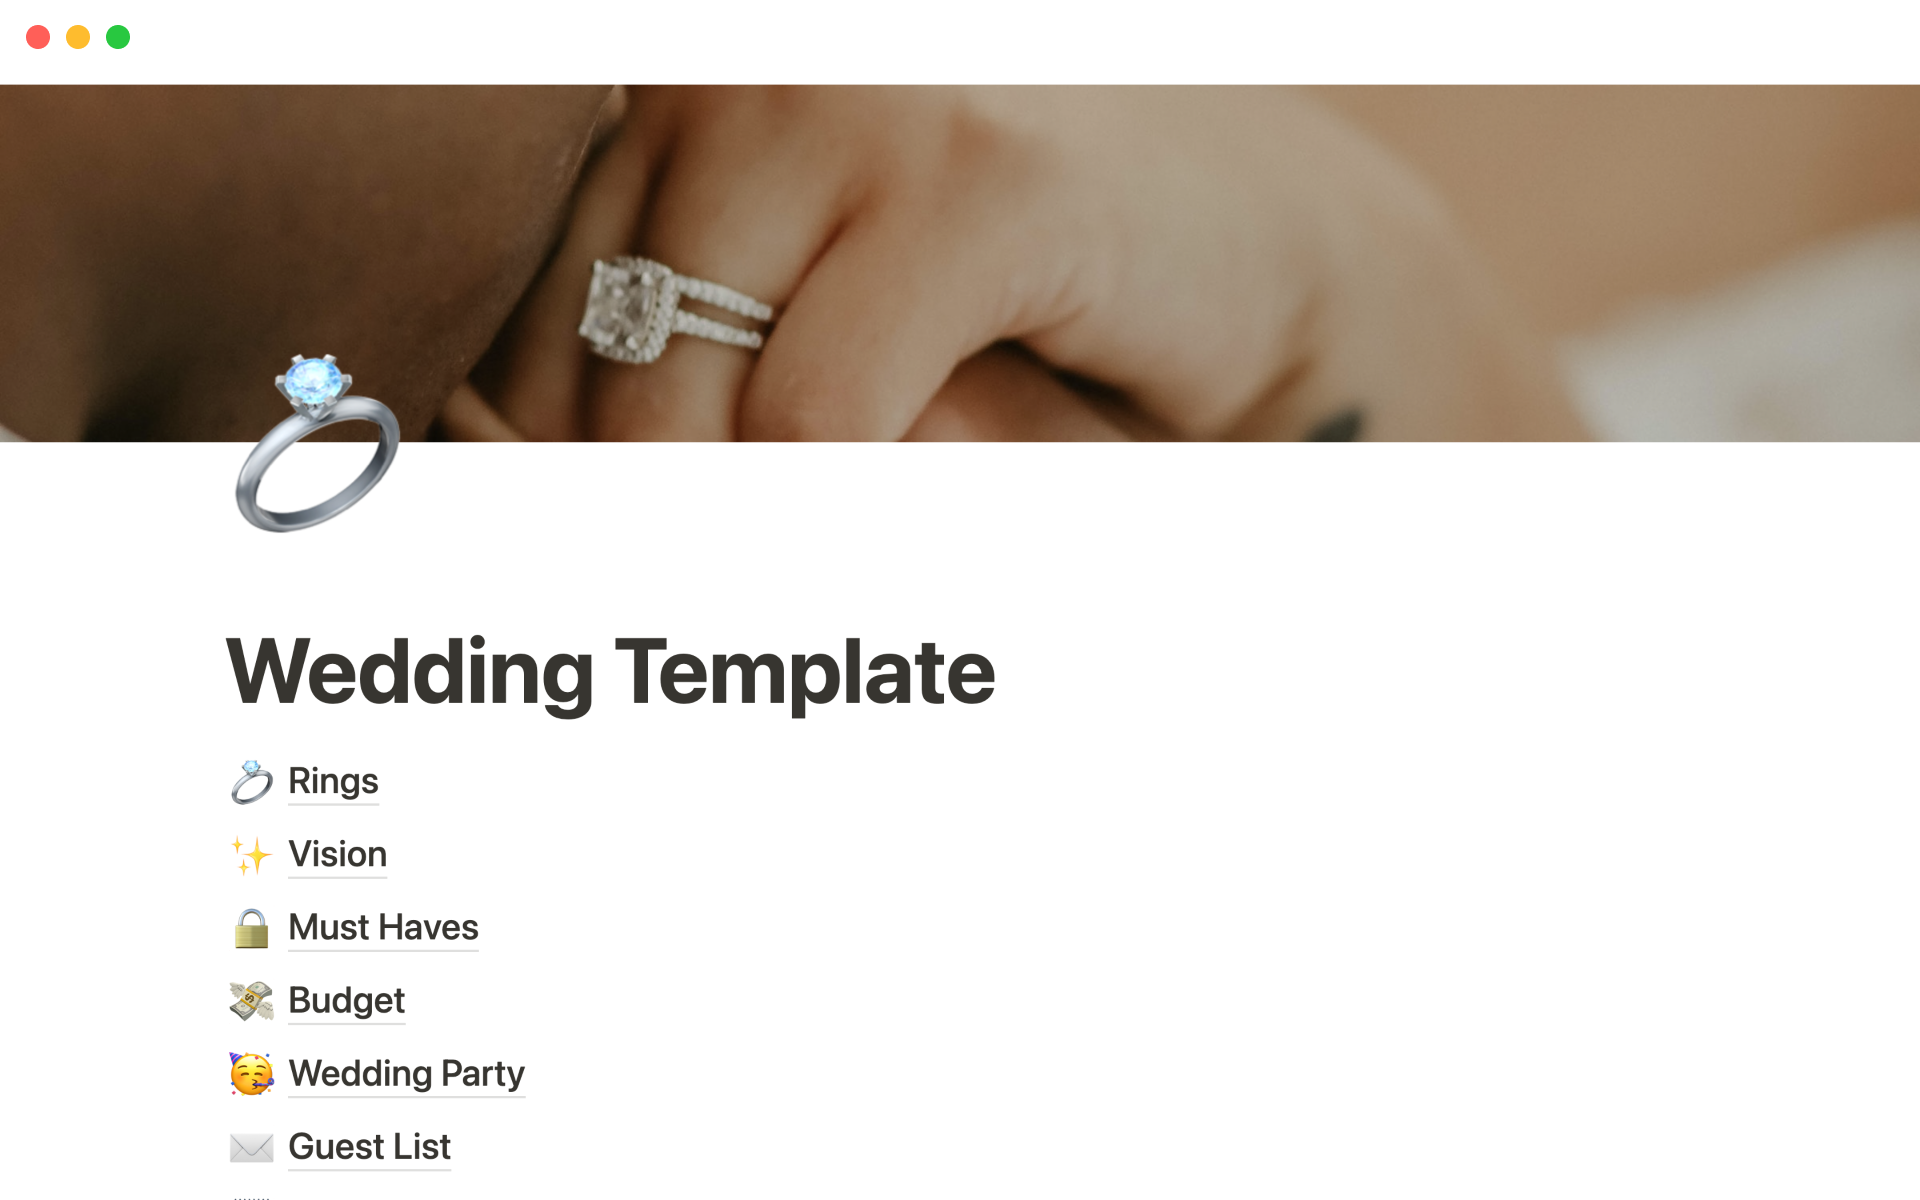 Resources for engaged couples to plan their dream wedding.